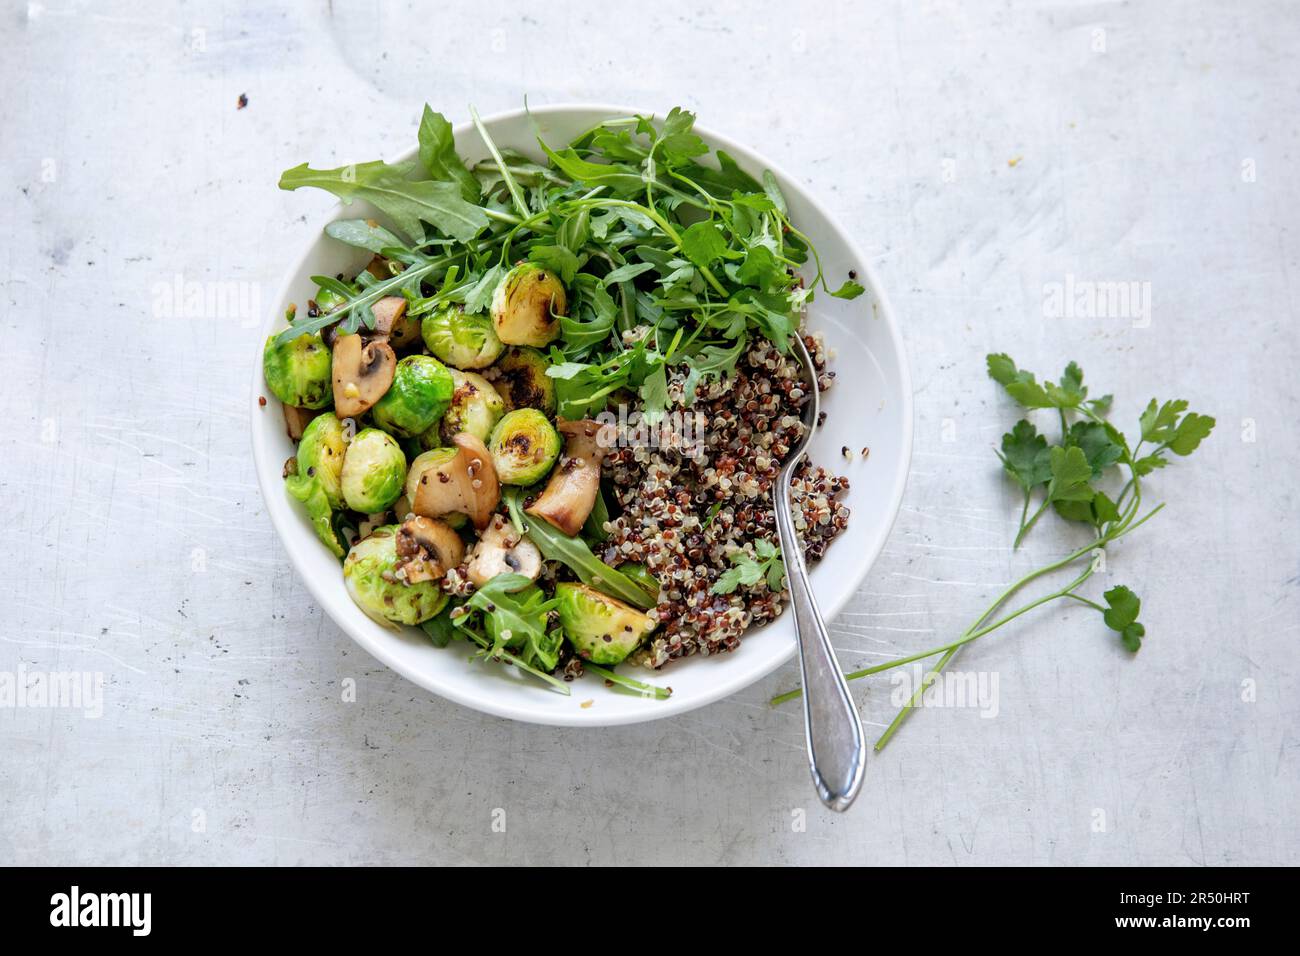 Mushroom and Brussels sprouts pan with quinoa Stock Photo